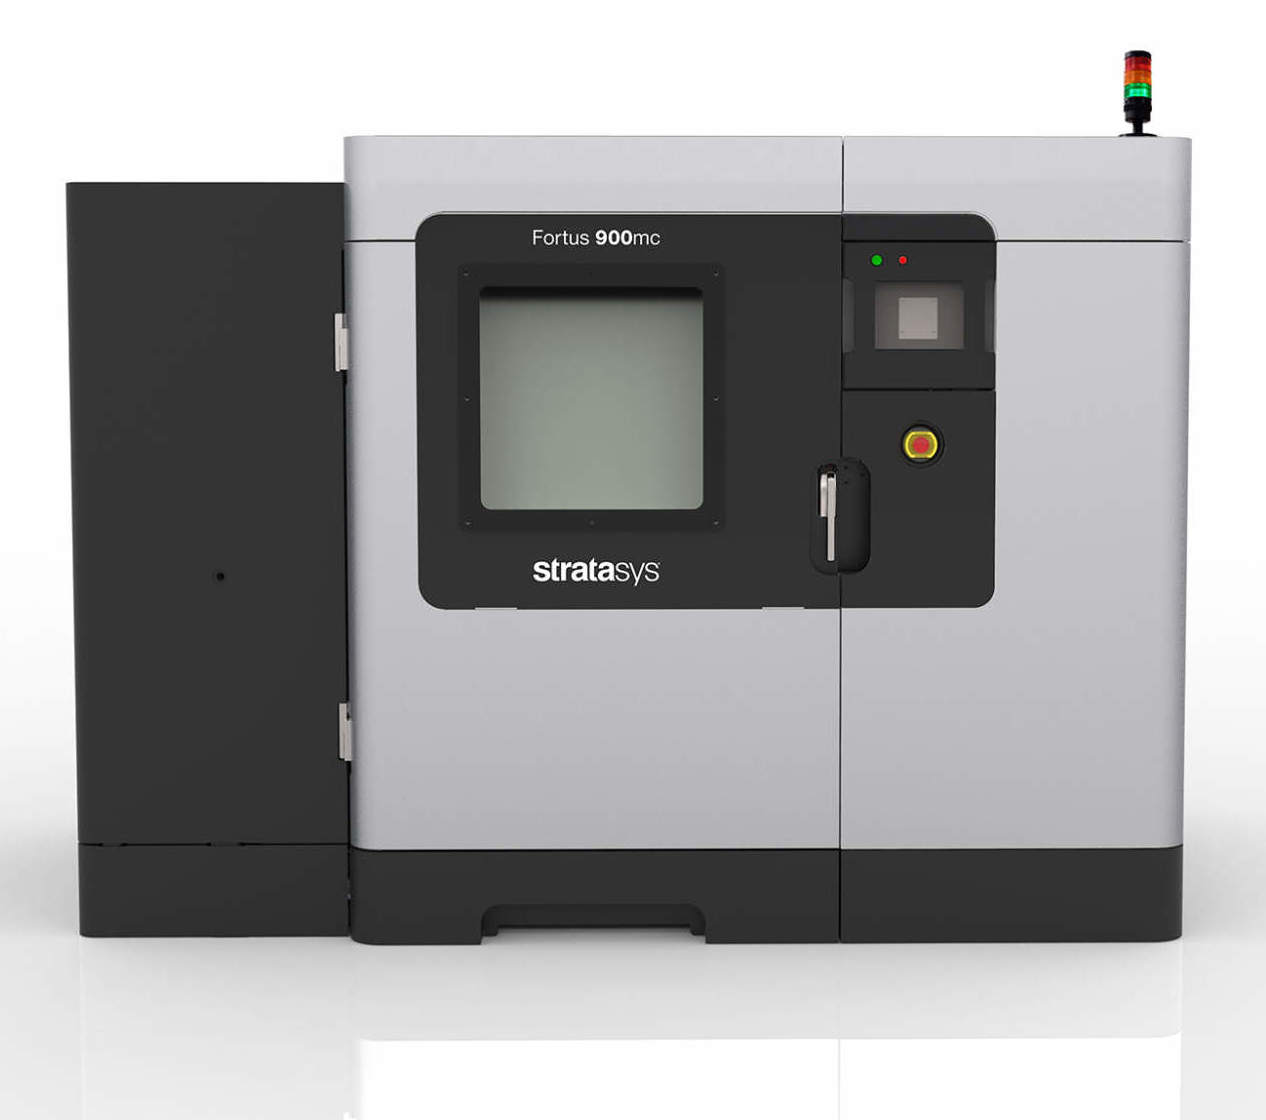 New edition of the Fortus 900mc specially for aerospace solutions. Image via Stratasys.